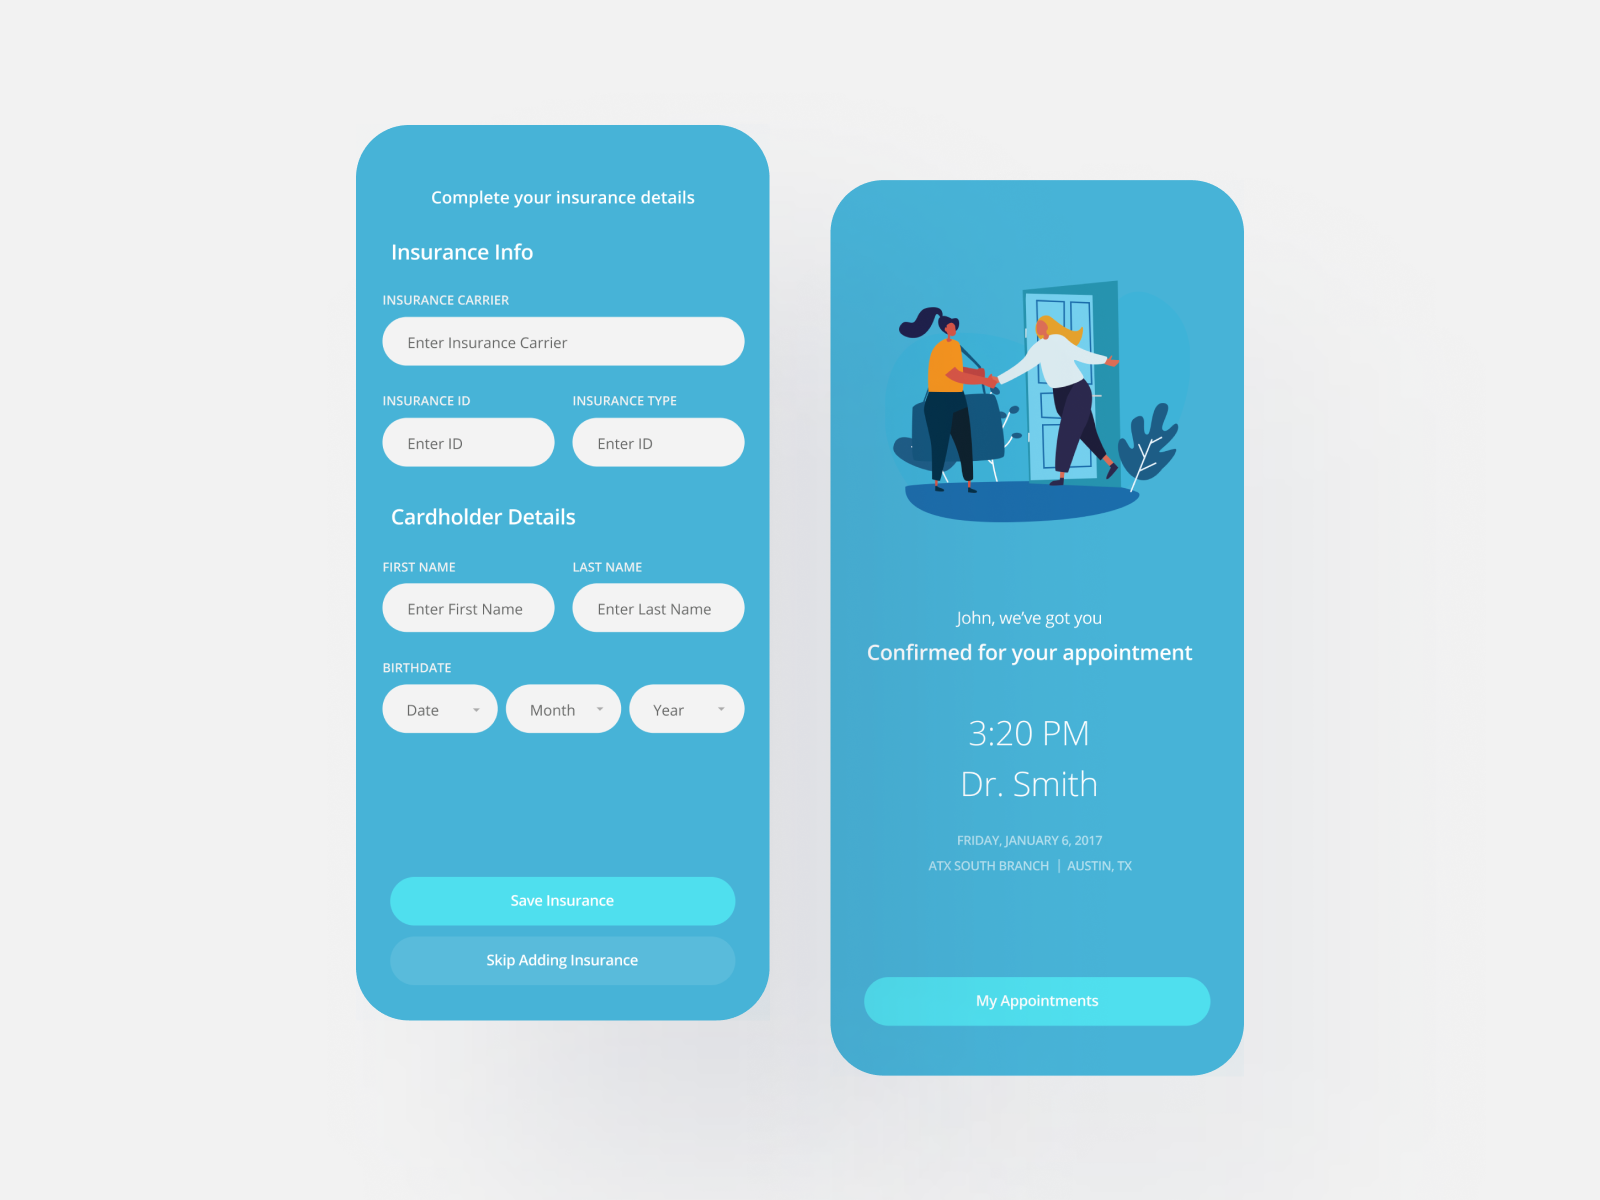 Freebie: Doctor appointment IOS app ui design by Roger on Dribbble